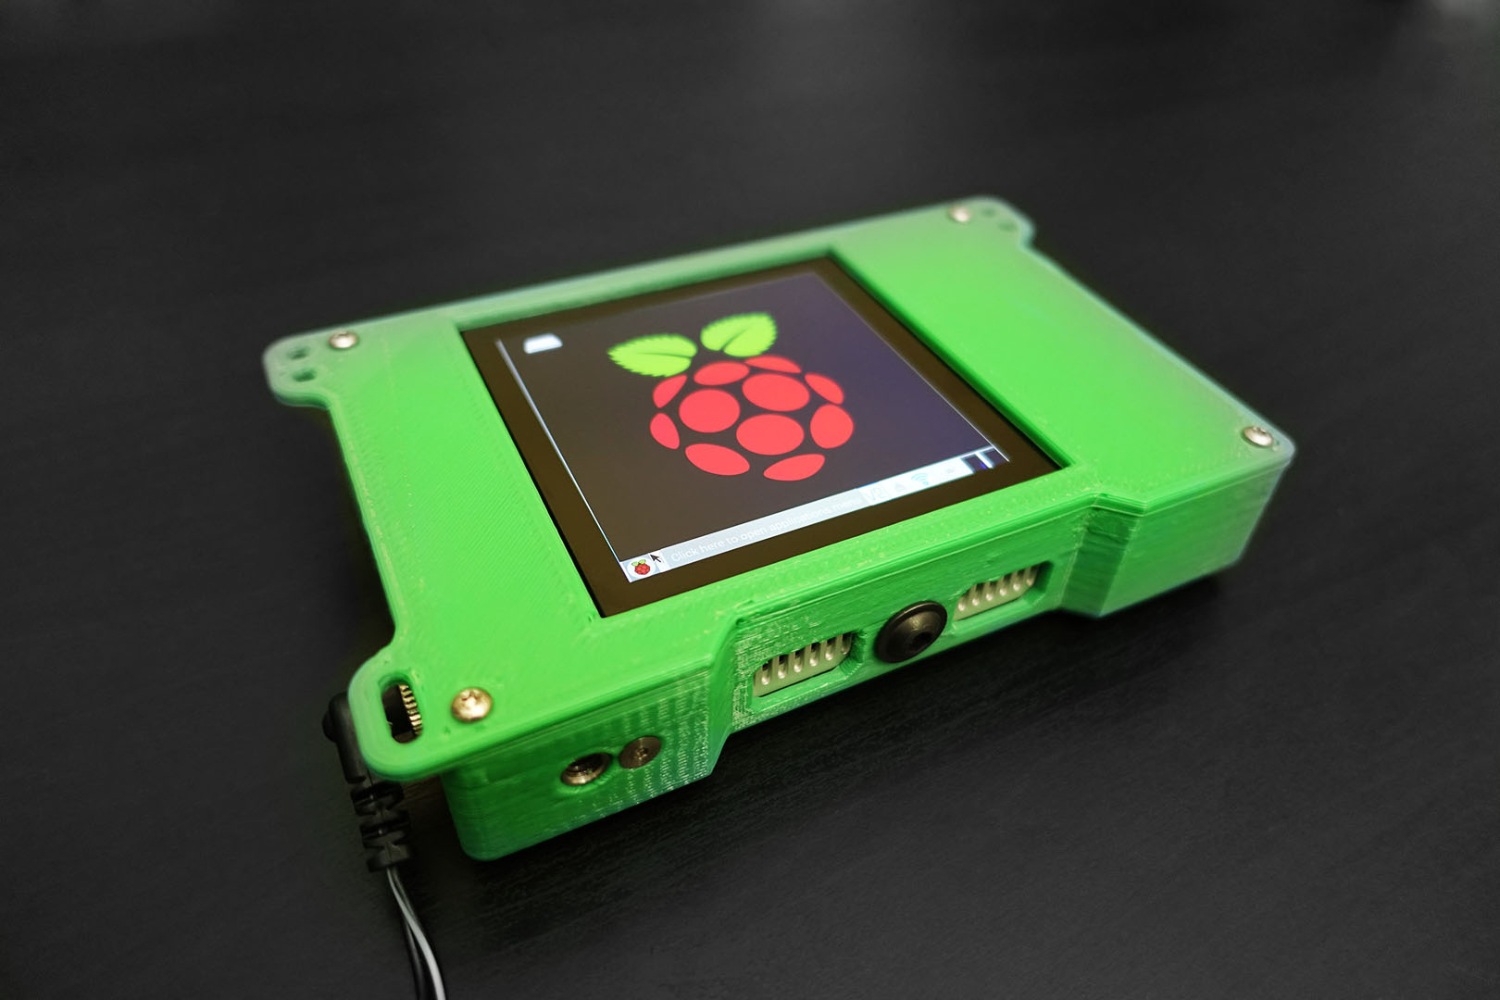 How To Make A 3D Scanner With Raspberry Pi